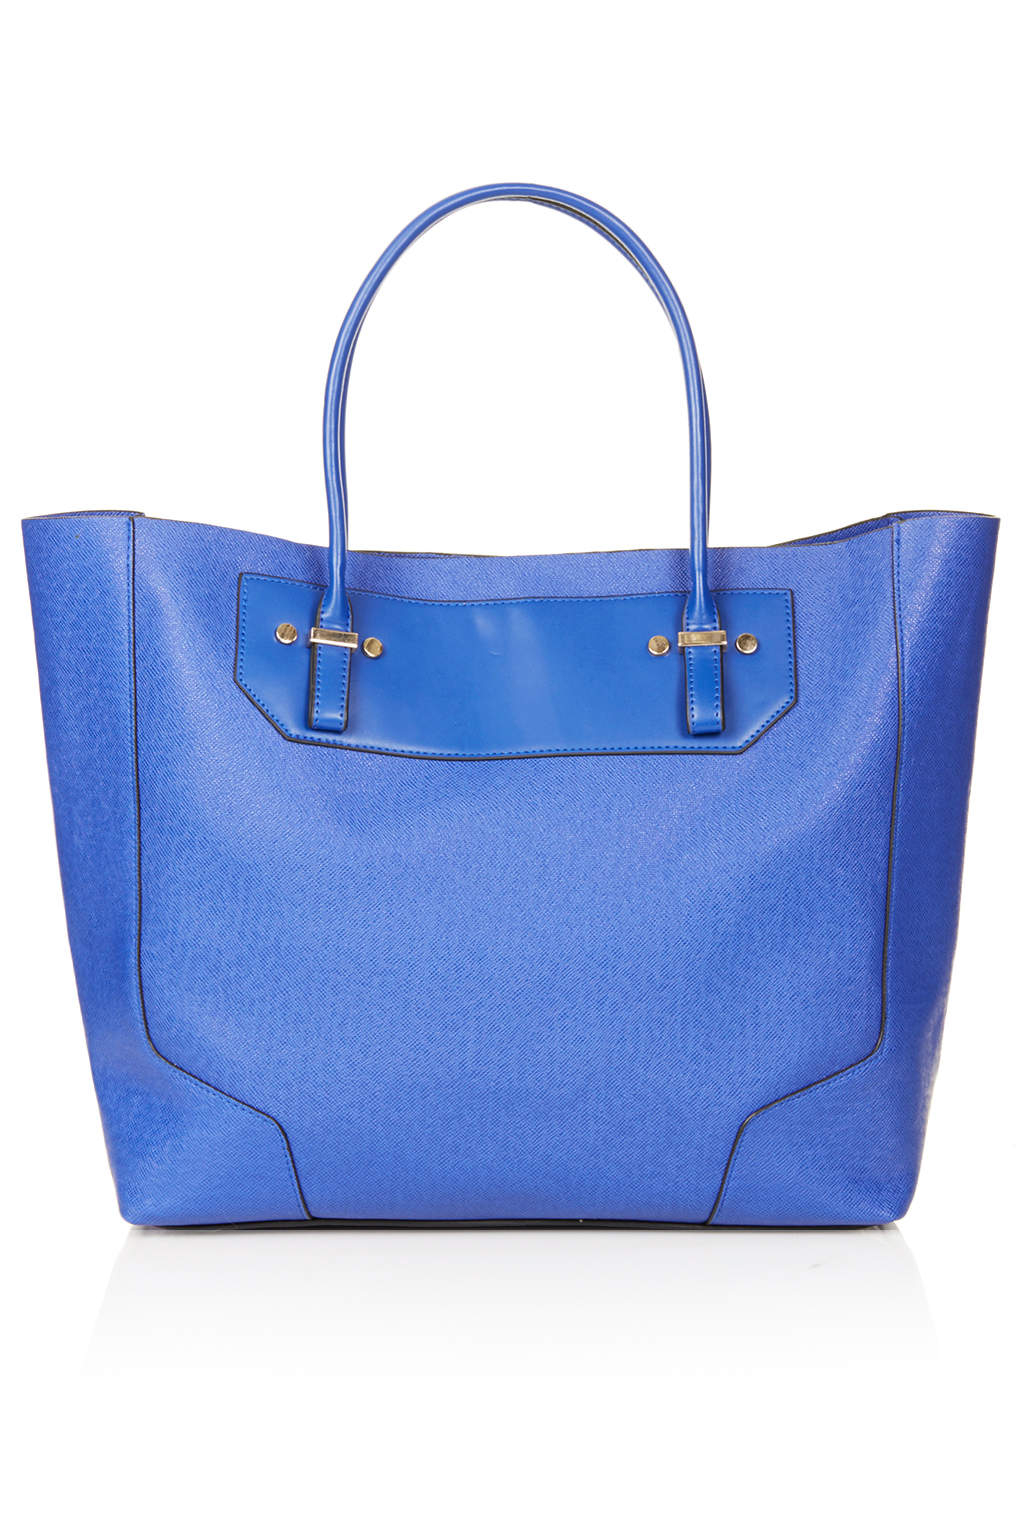 Topshop Saffiano Tote Bag in Blue | Lyst